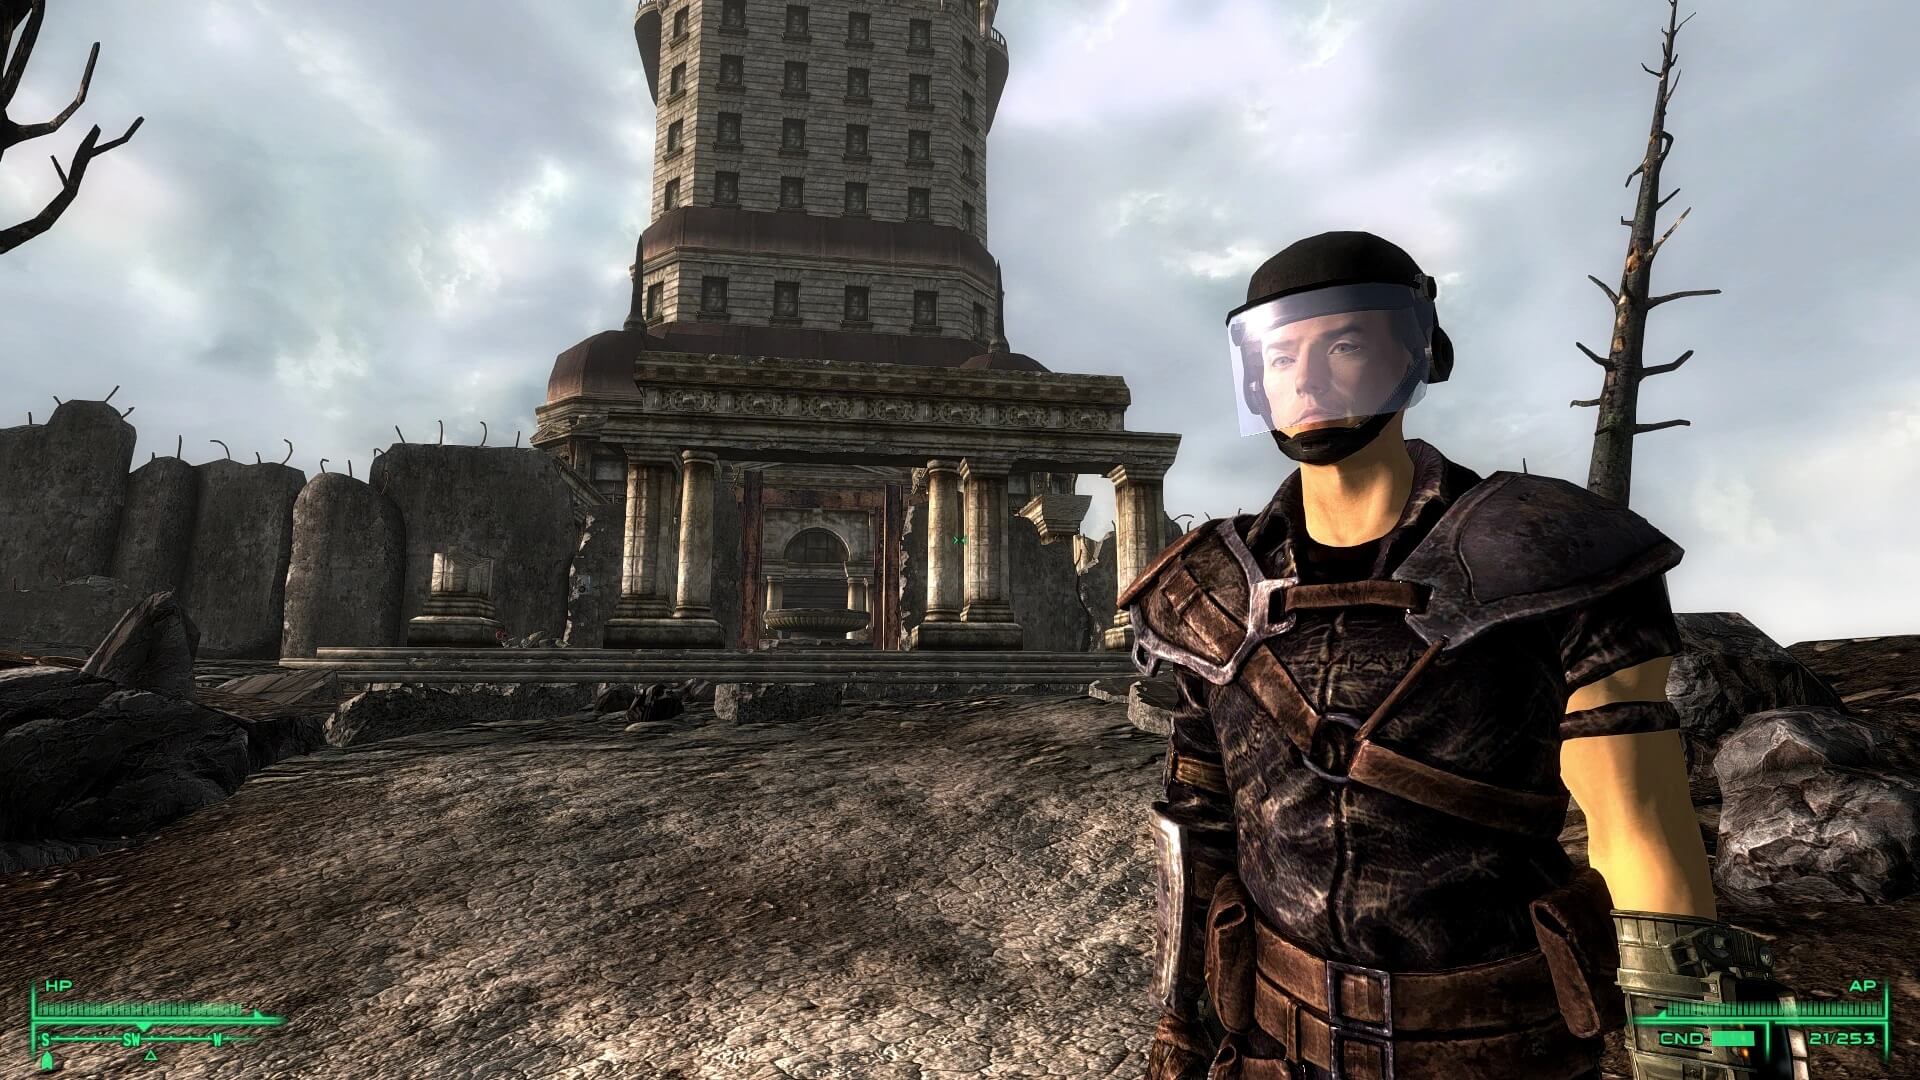 This Fallout 3 Mod overhauls all textures for armour, clothing and headgear